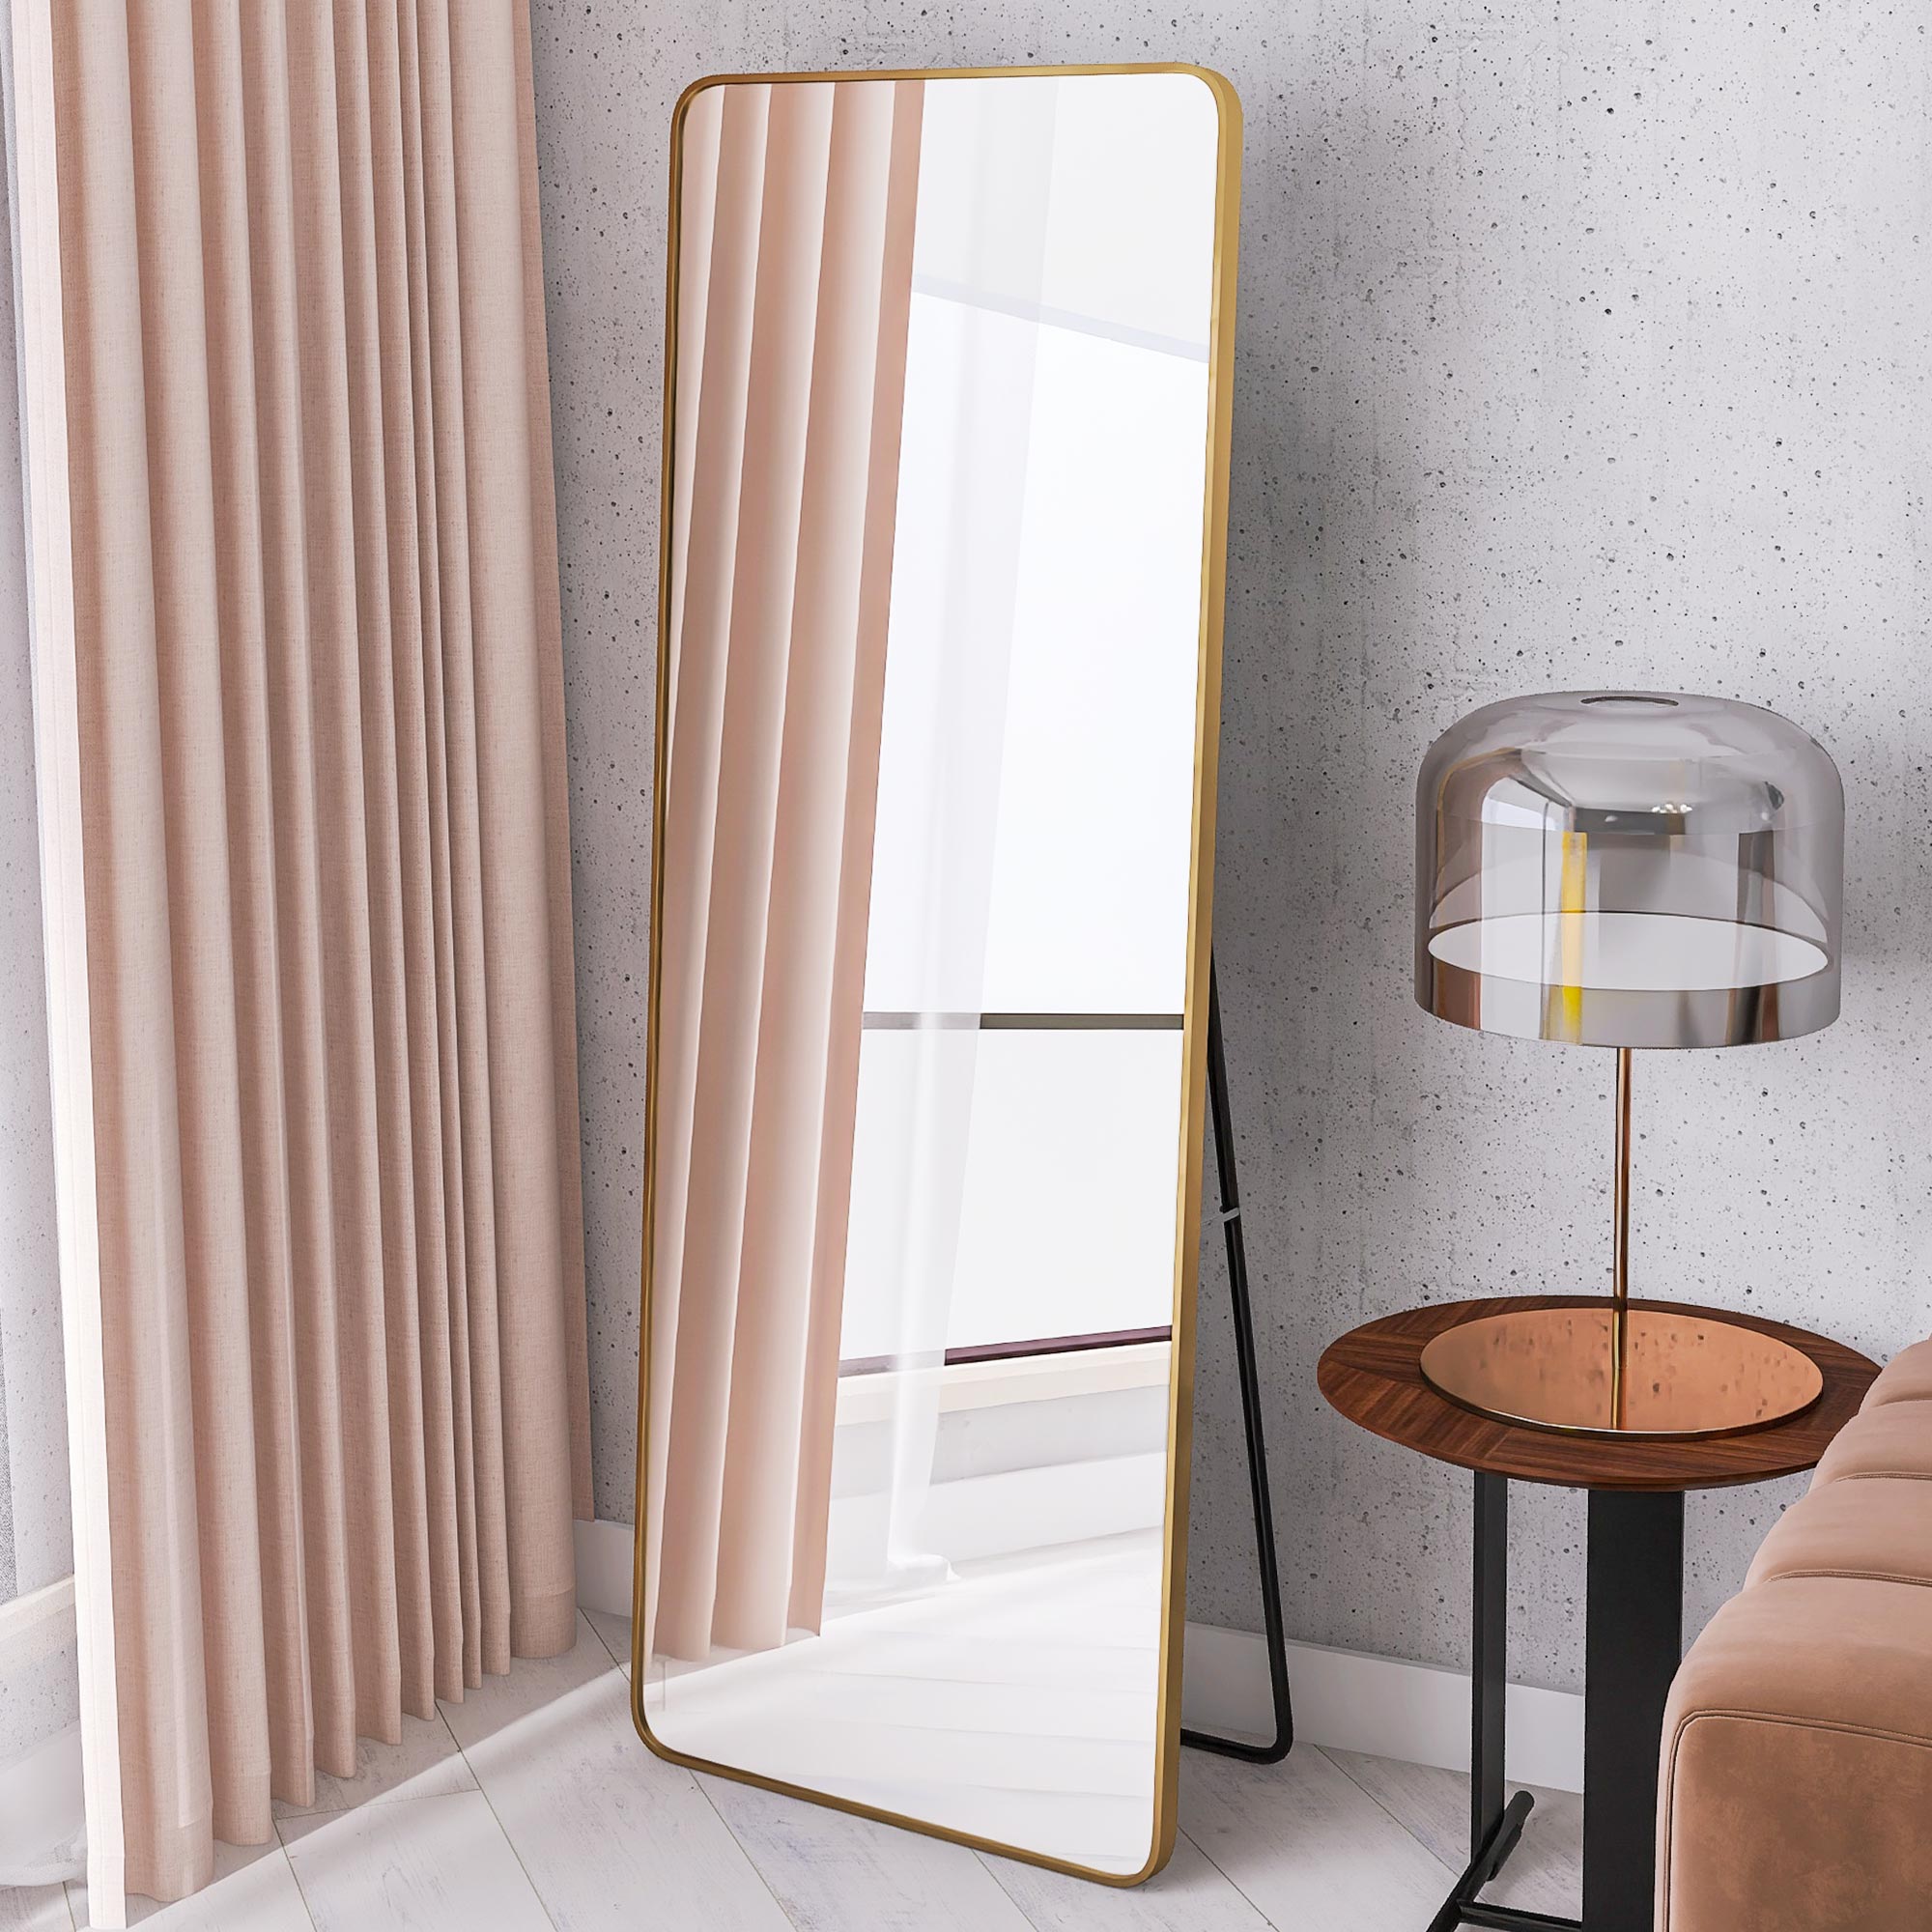 ZNTS square rounded corners Full Length Mirror Floor Mirror Hanging Standing or Leaning, Bedroom Mirror W66247645